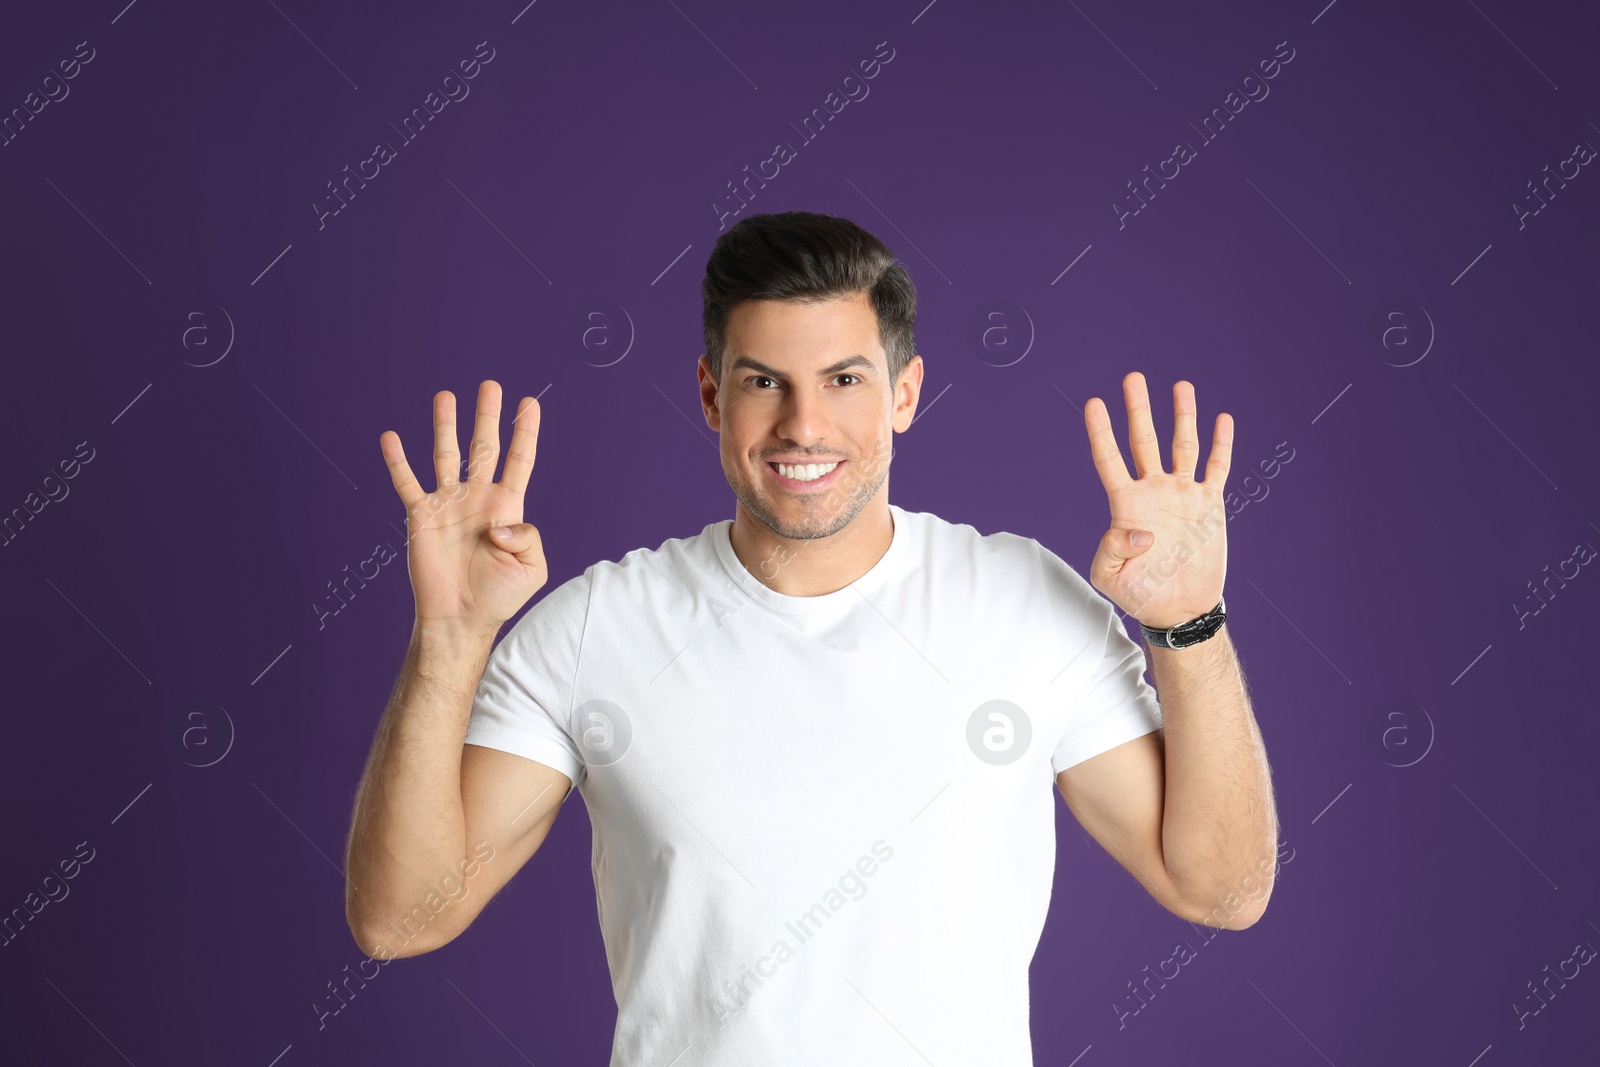 Photo of Man showing number eight with his hands on purple background